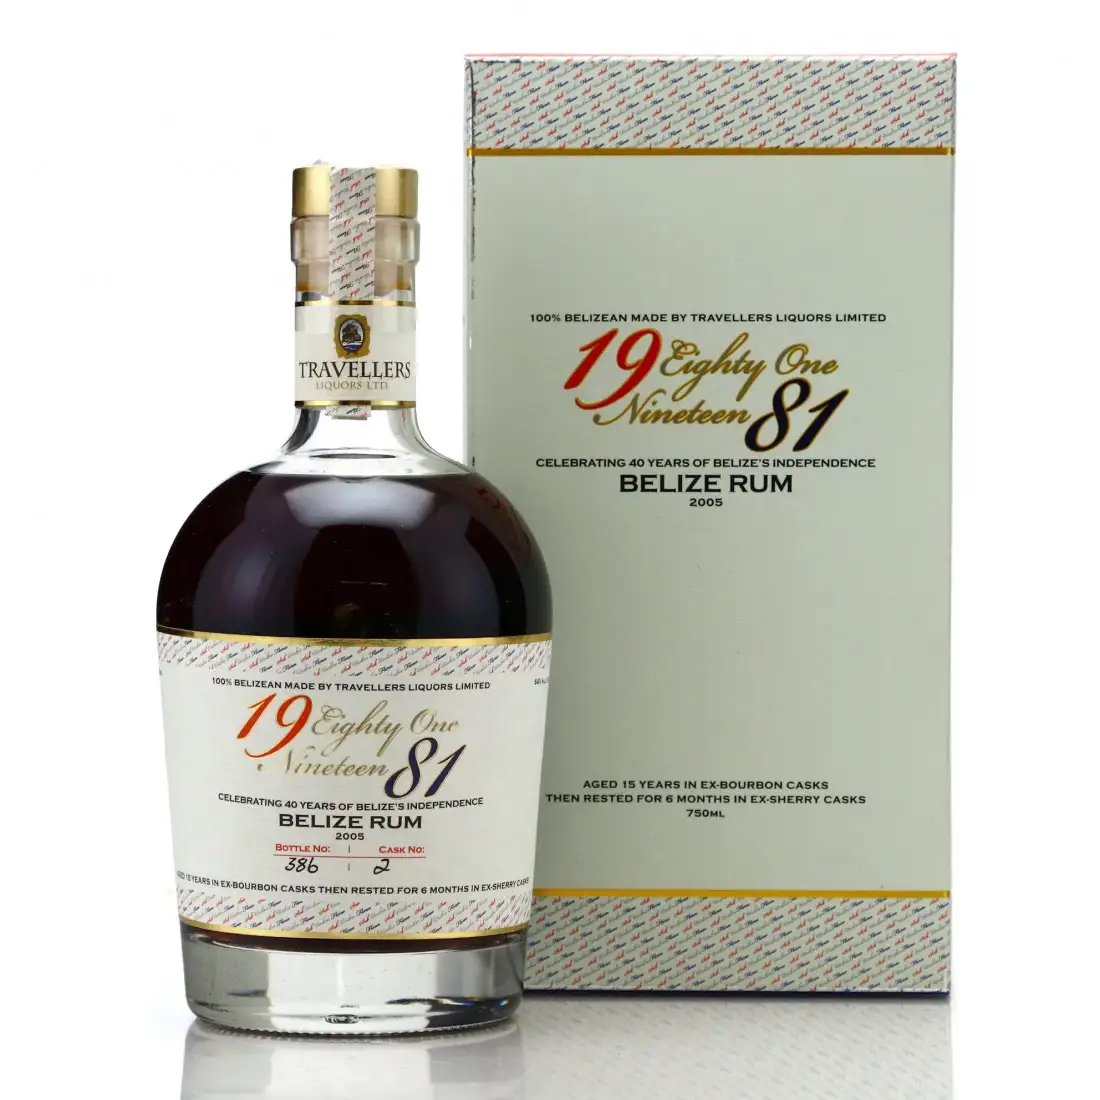 Image of the front of the bottle of the rum 1981 Eighty One Nineteen